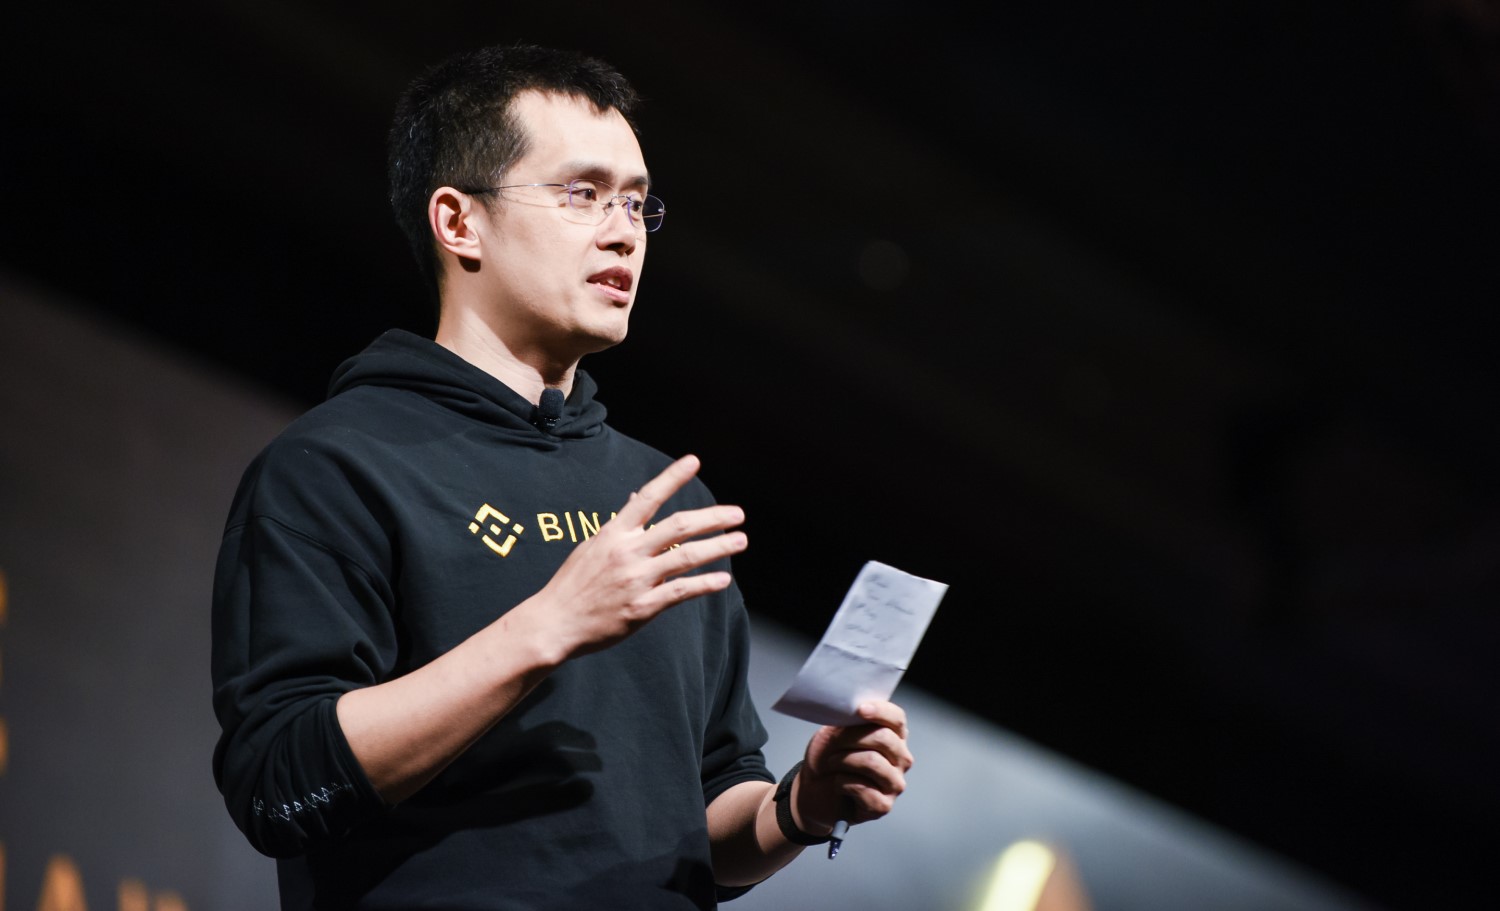 Binance-ceo-criticizes-twitter-security-after-coordinated-attack-on-prominent-accounts